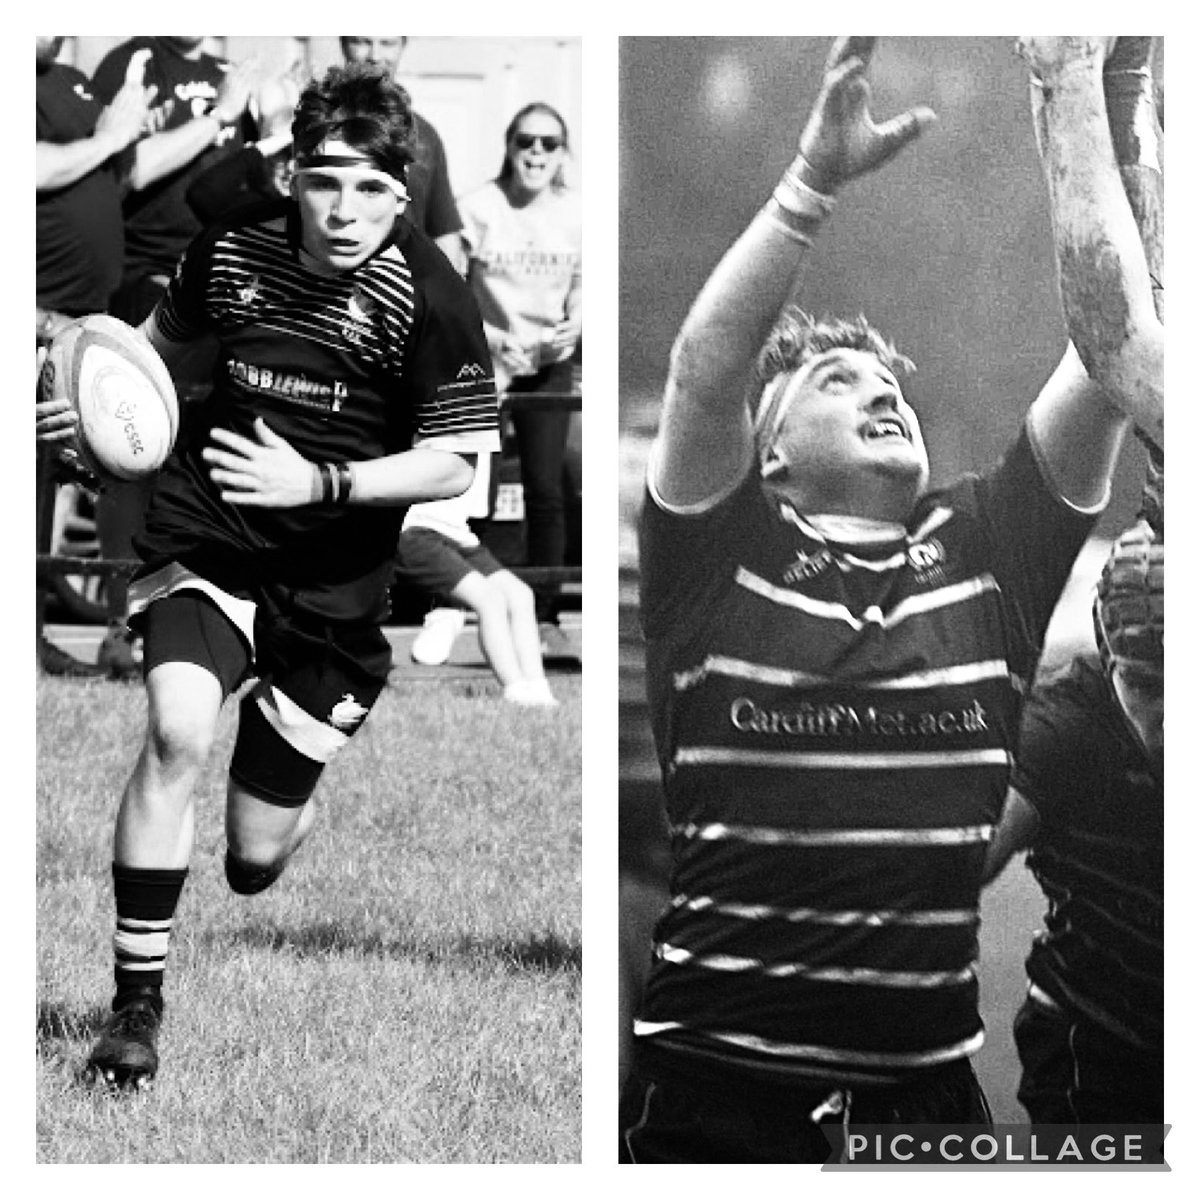 Another amazing rugby season done for the Jenkins family. 8 teams represented and over 60 games played in 4 countries. So proud of these two and the rugby friends and memories they continue to make for themselves and our family. @Bledd13 @nyejenks